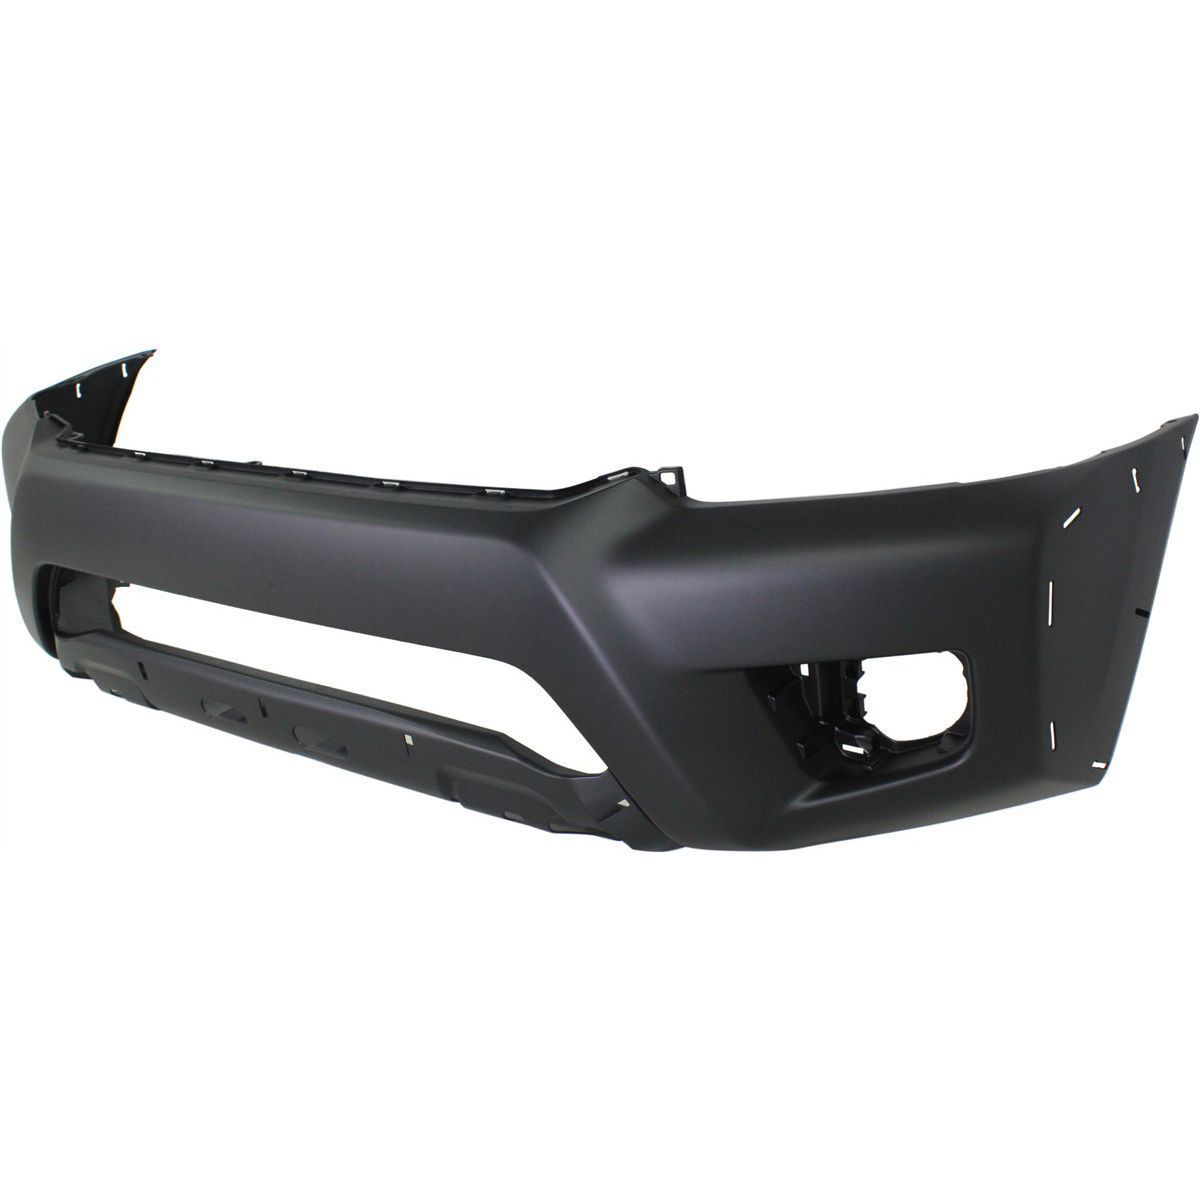 2012-2015 TOYOTA TACOMA Front Bumper Cover PRERUNNER  w/Wheel Opening Flares  Fine Textured Black Painted to Match